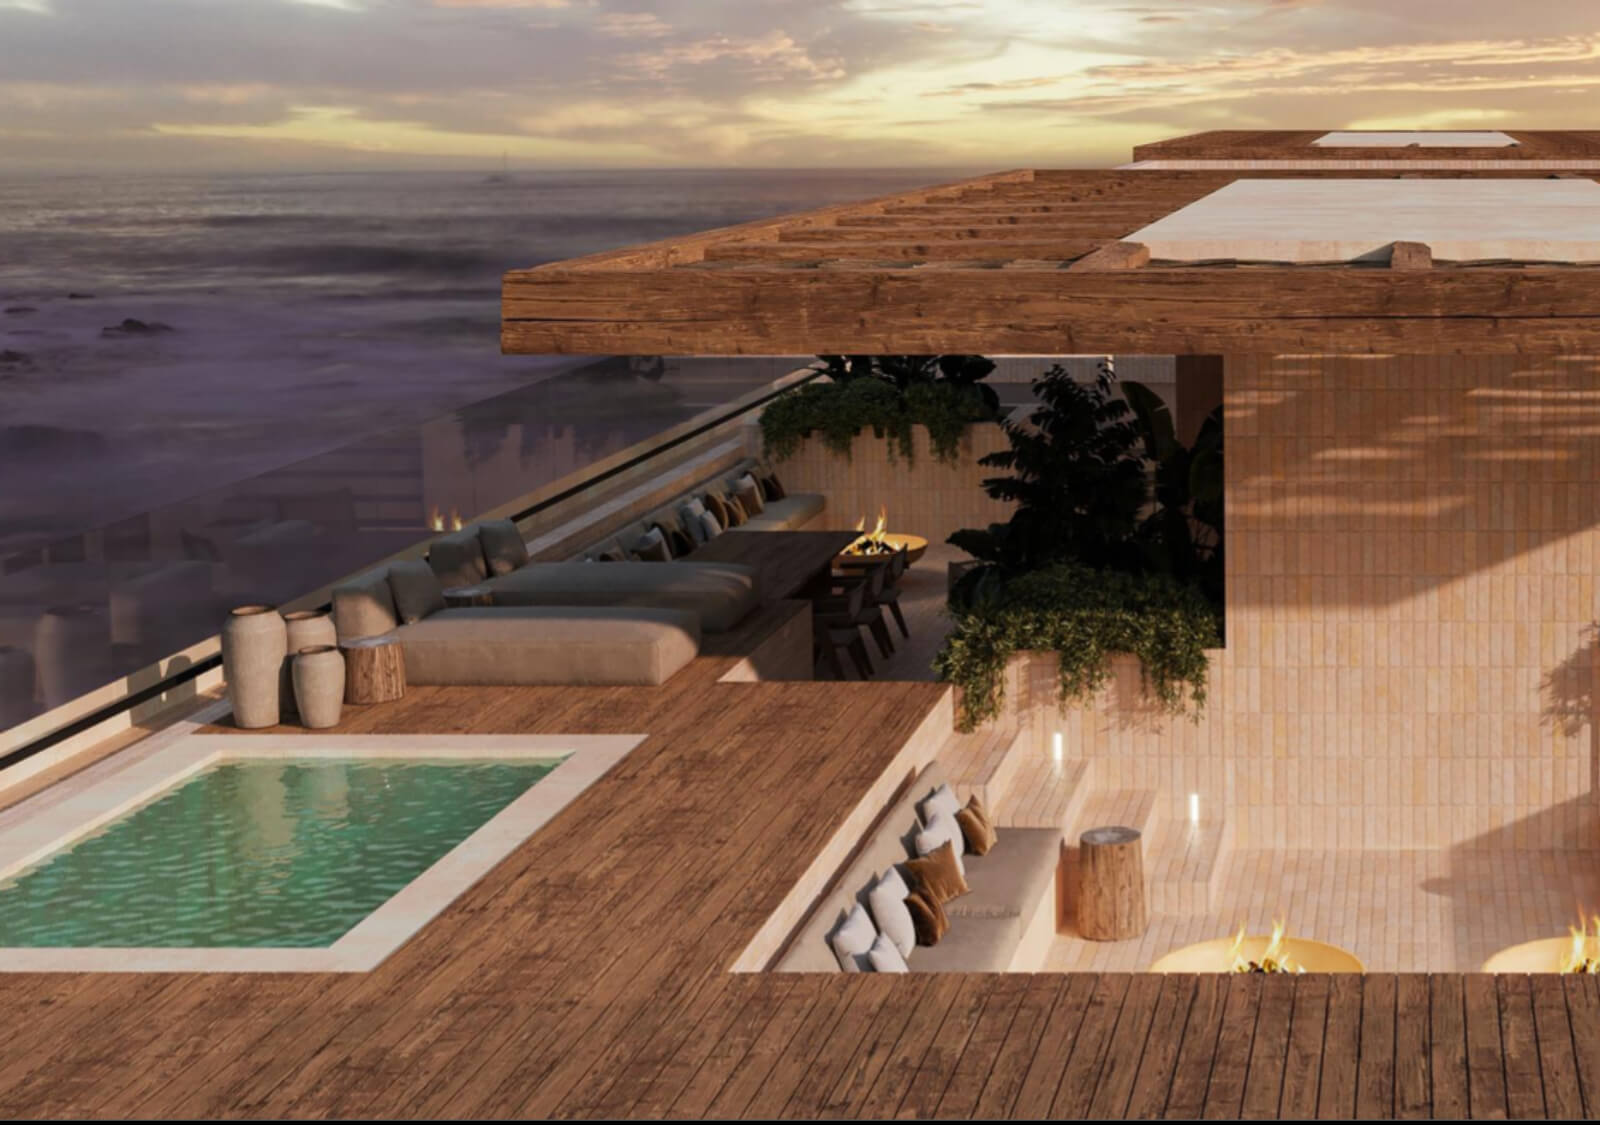 Ocean view penthouse, private terrace of 196 m2,  ocean front pool, beach access, unique design, innovative architecture, room service, kids